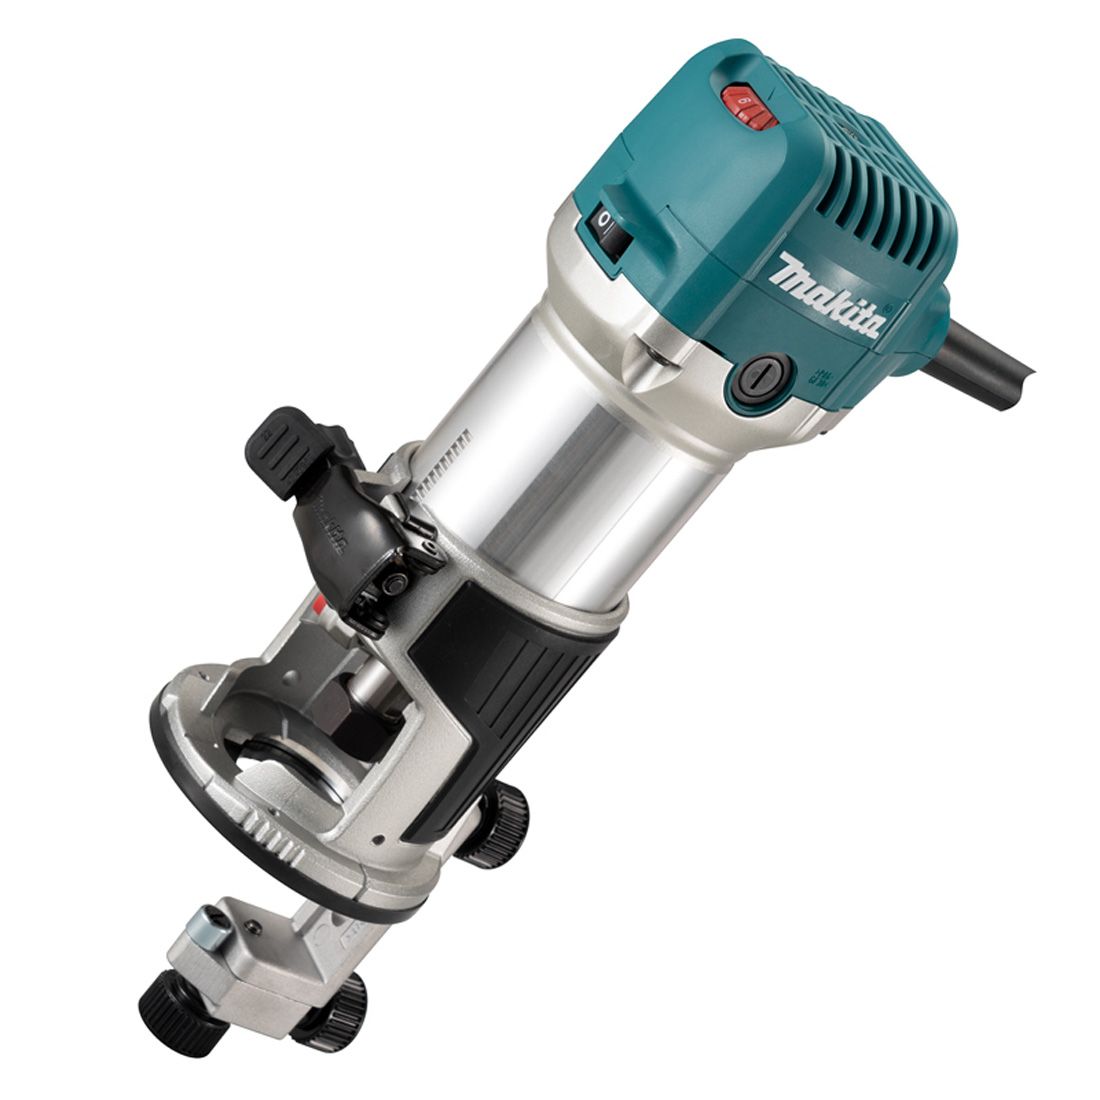 Makita RT0702CX4/2 240V Router Trimmer With Plunge Router Base